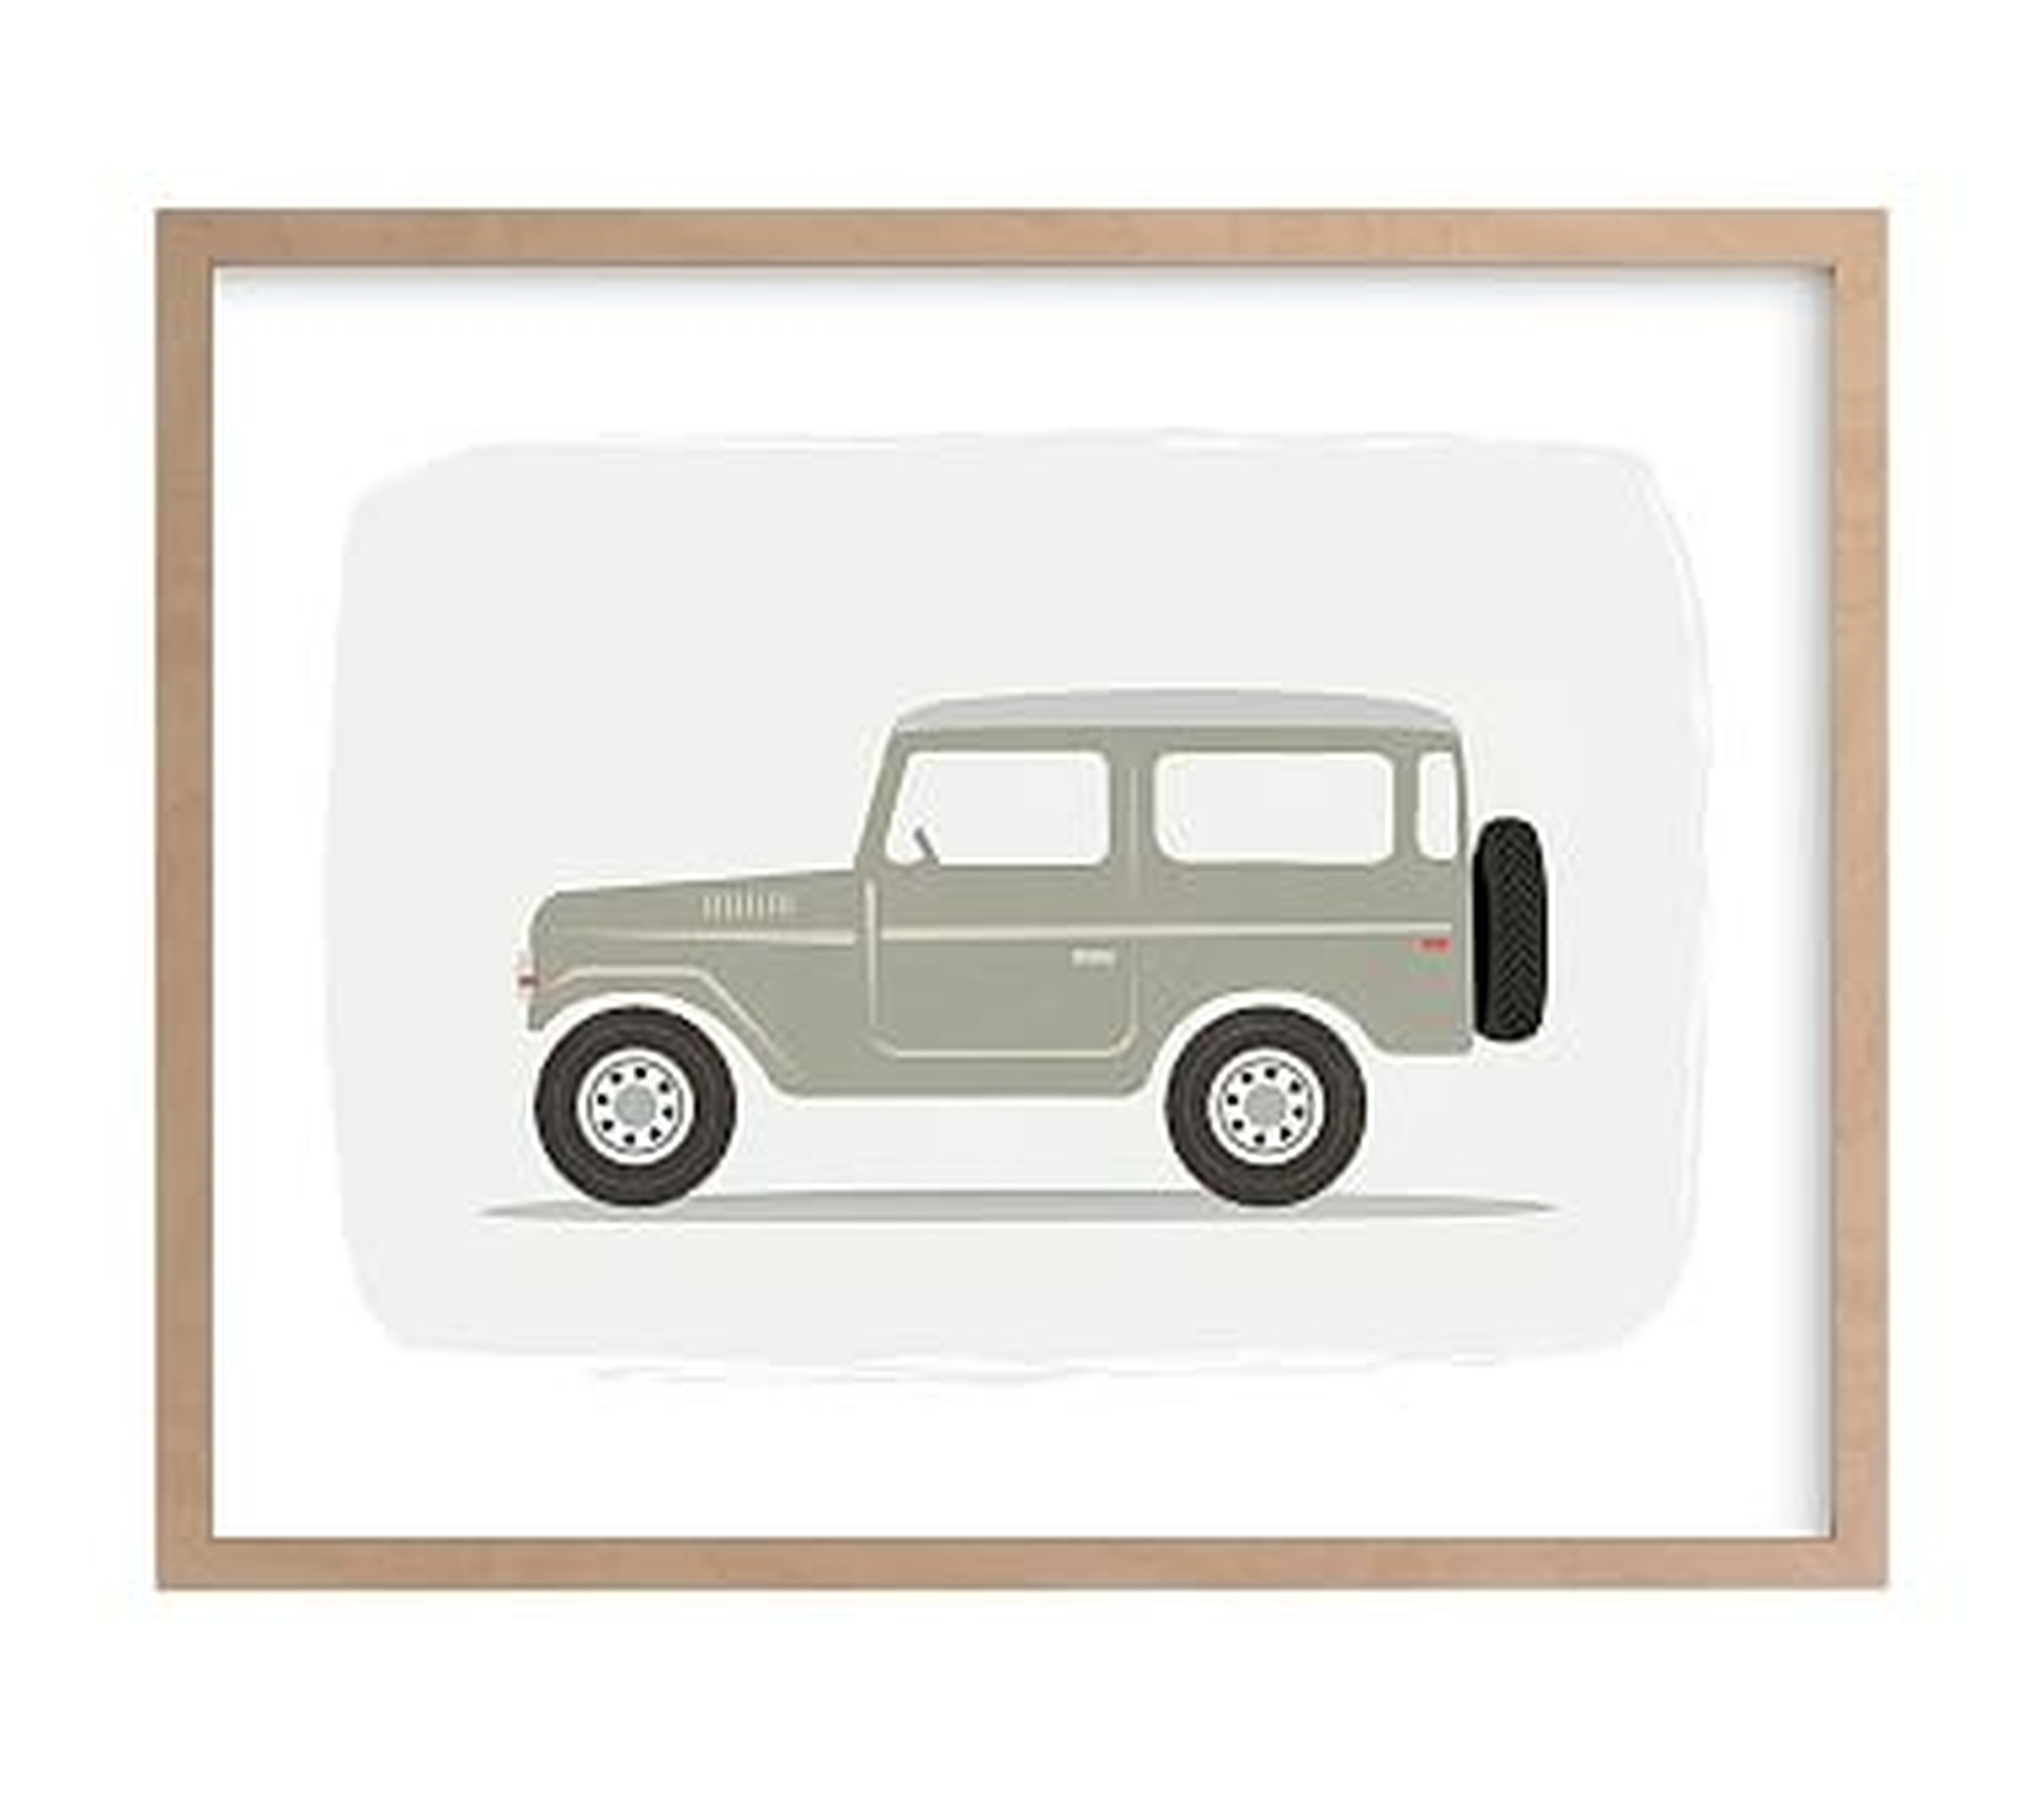 Vintage Land Cruiser, Wall Art by Minted(R), 11x14, Natural - Pottery Barn Kids